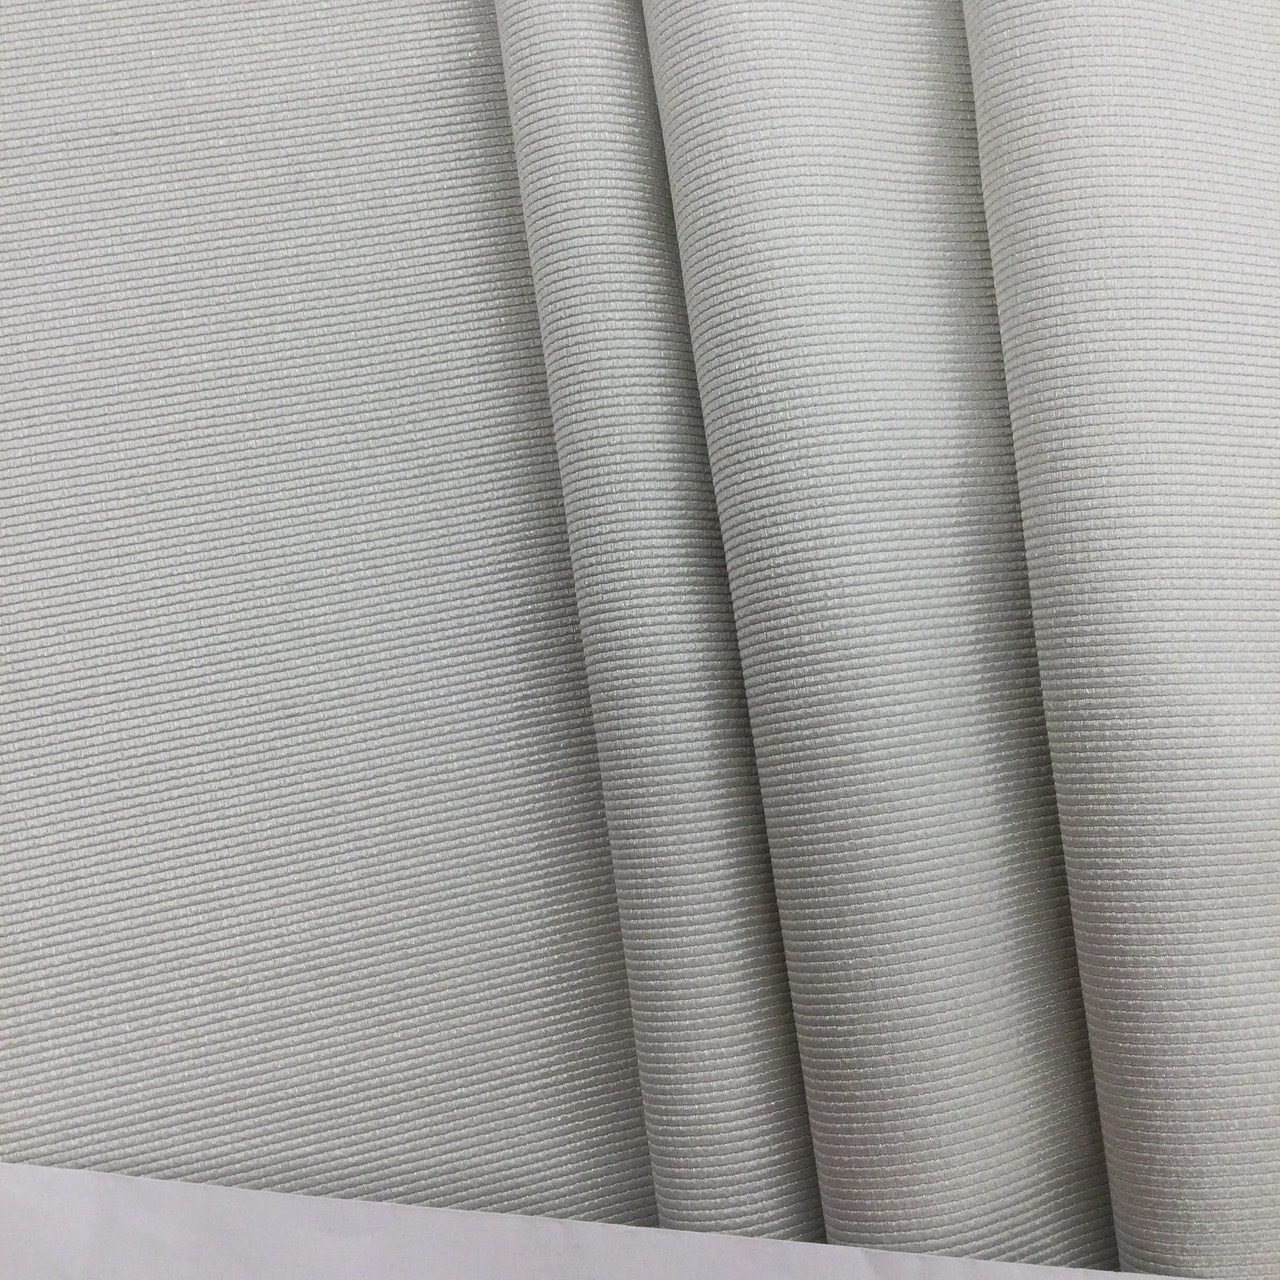 Pearly Off-White, Upholstery Fabric, Polyester, 54 Wide